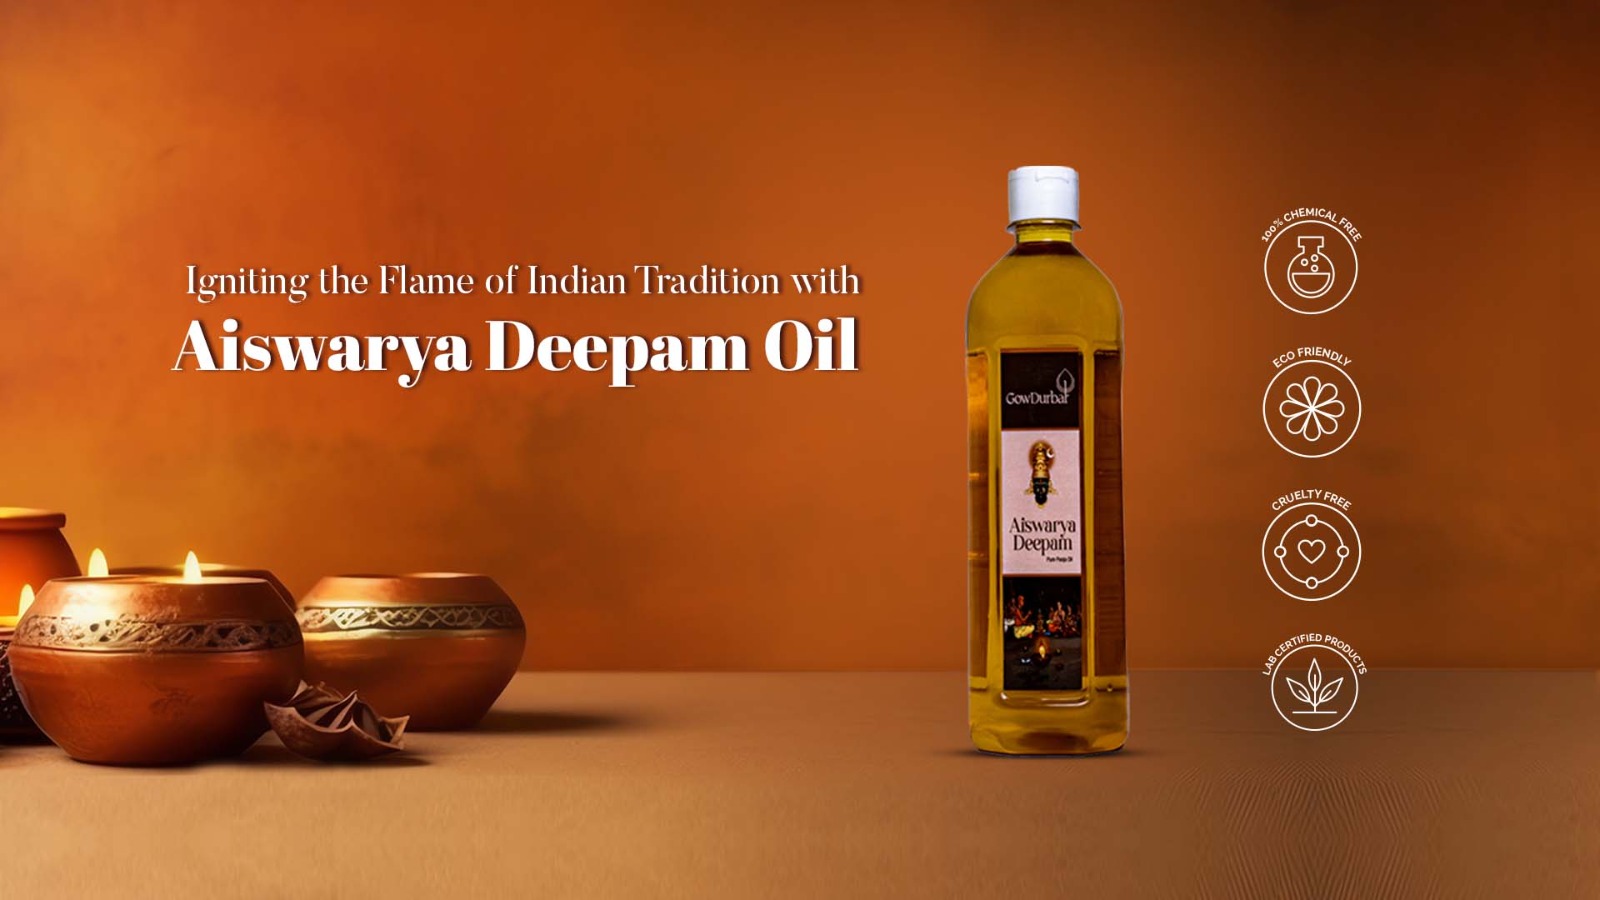 Aiswarya Deepam Oil: Illuminating Traditions in Every Home